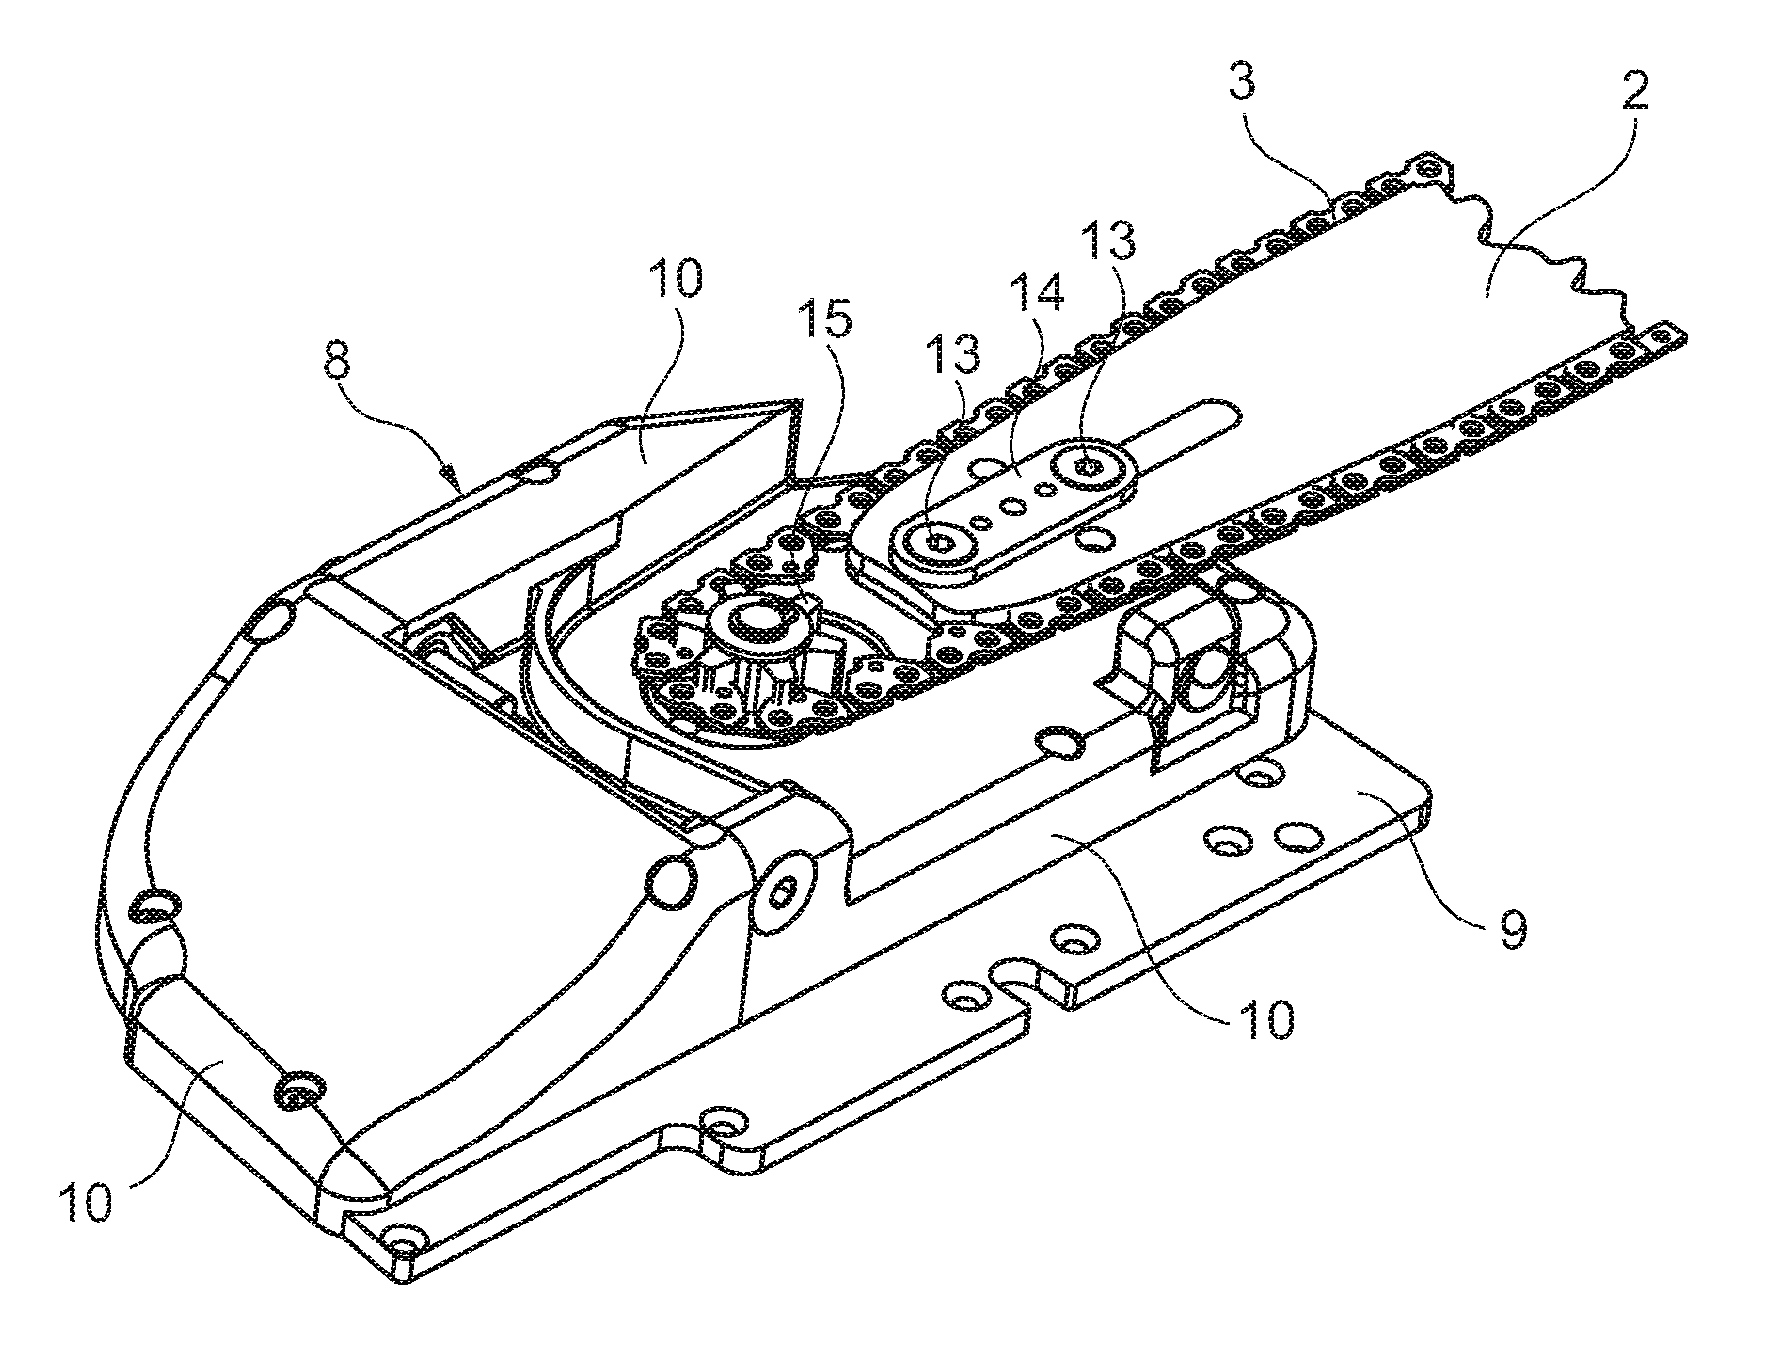 Quick-action chain tensioning device for a chainsaw, and such mechanism and method